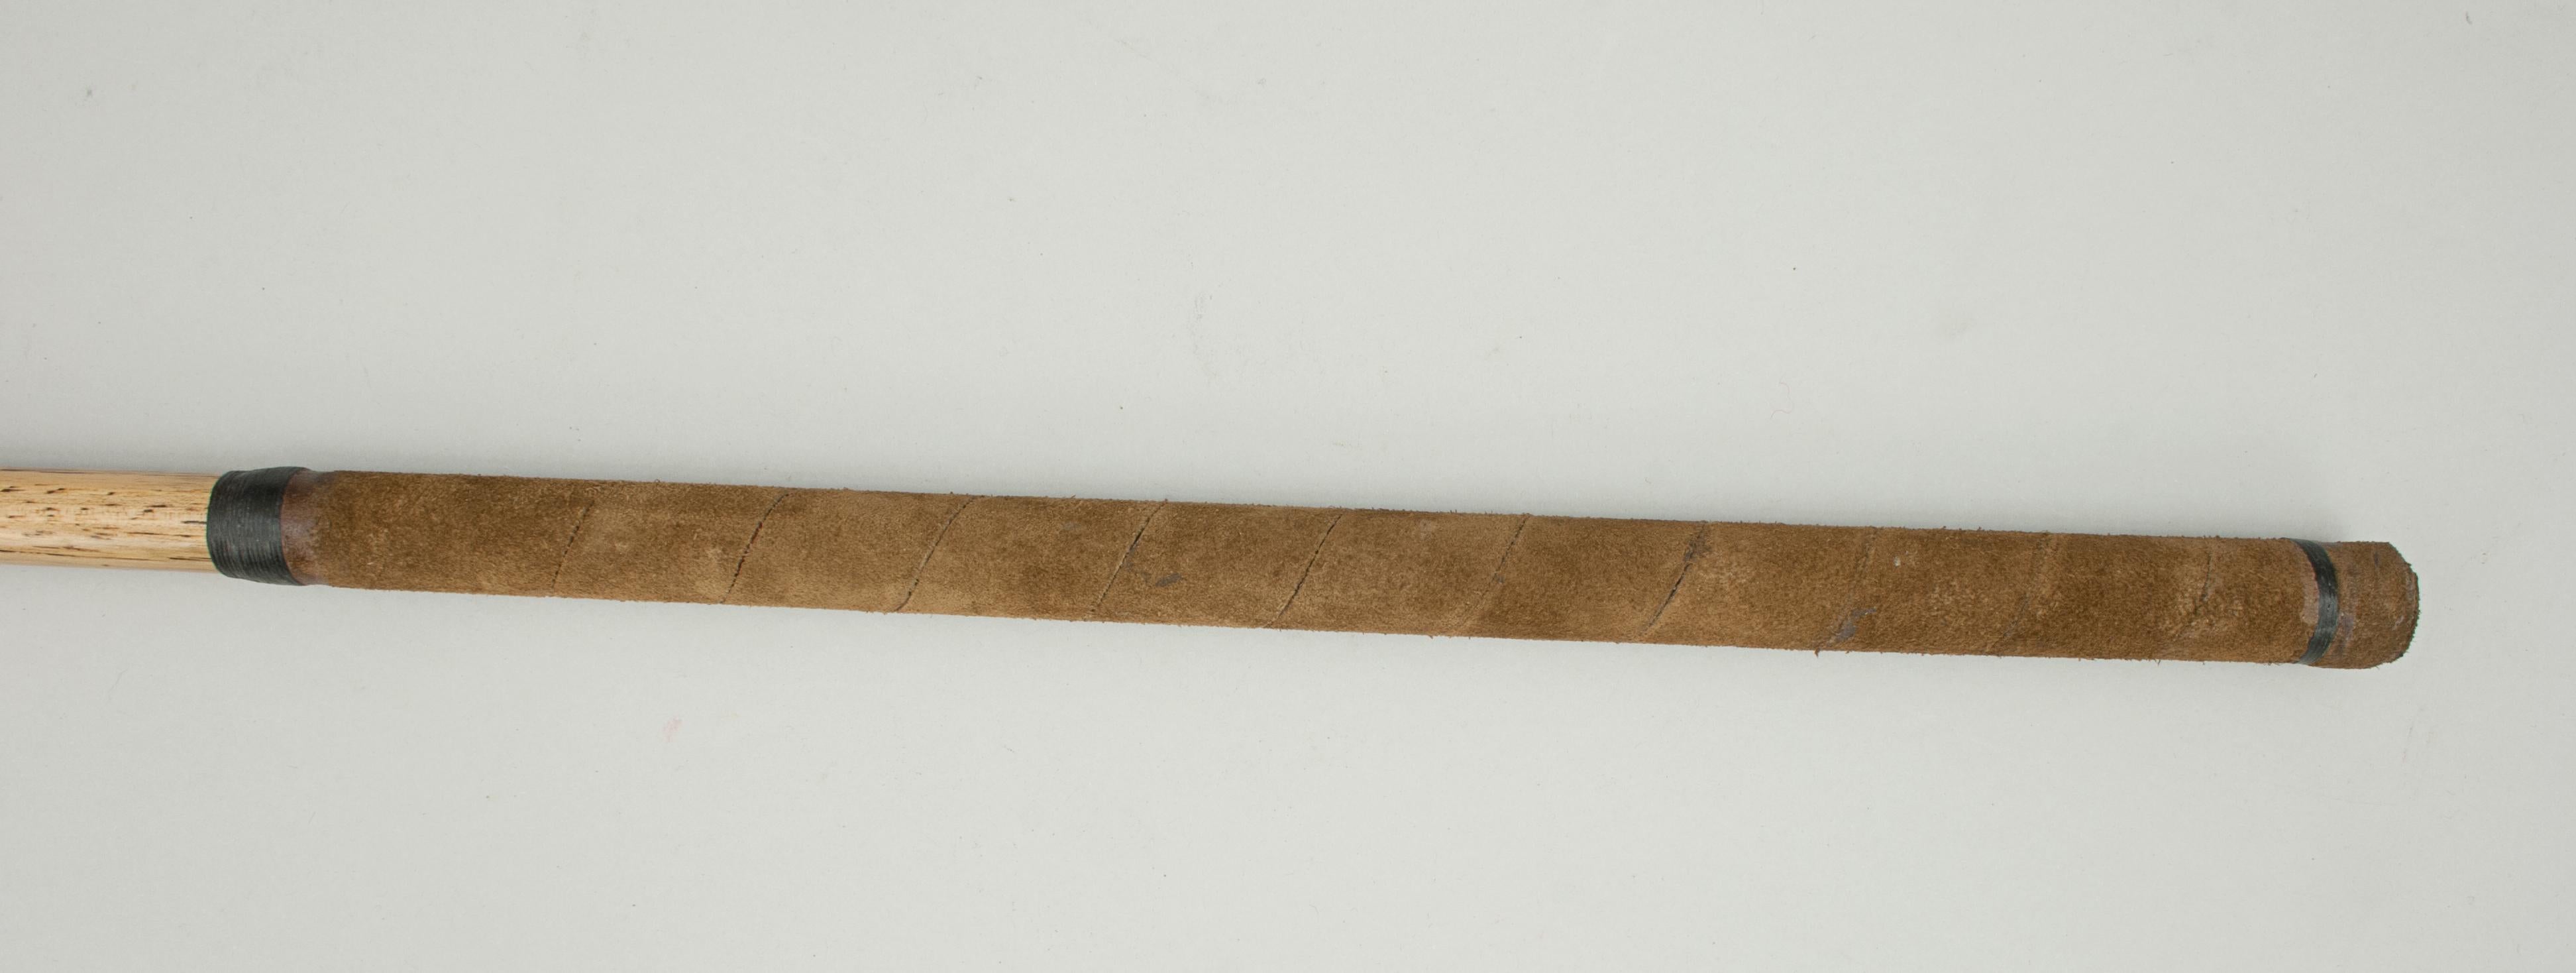 Hickory Shafted Niblick, Golf Club 1